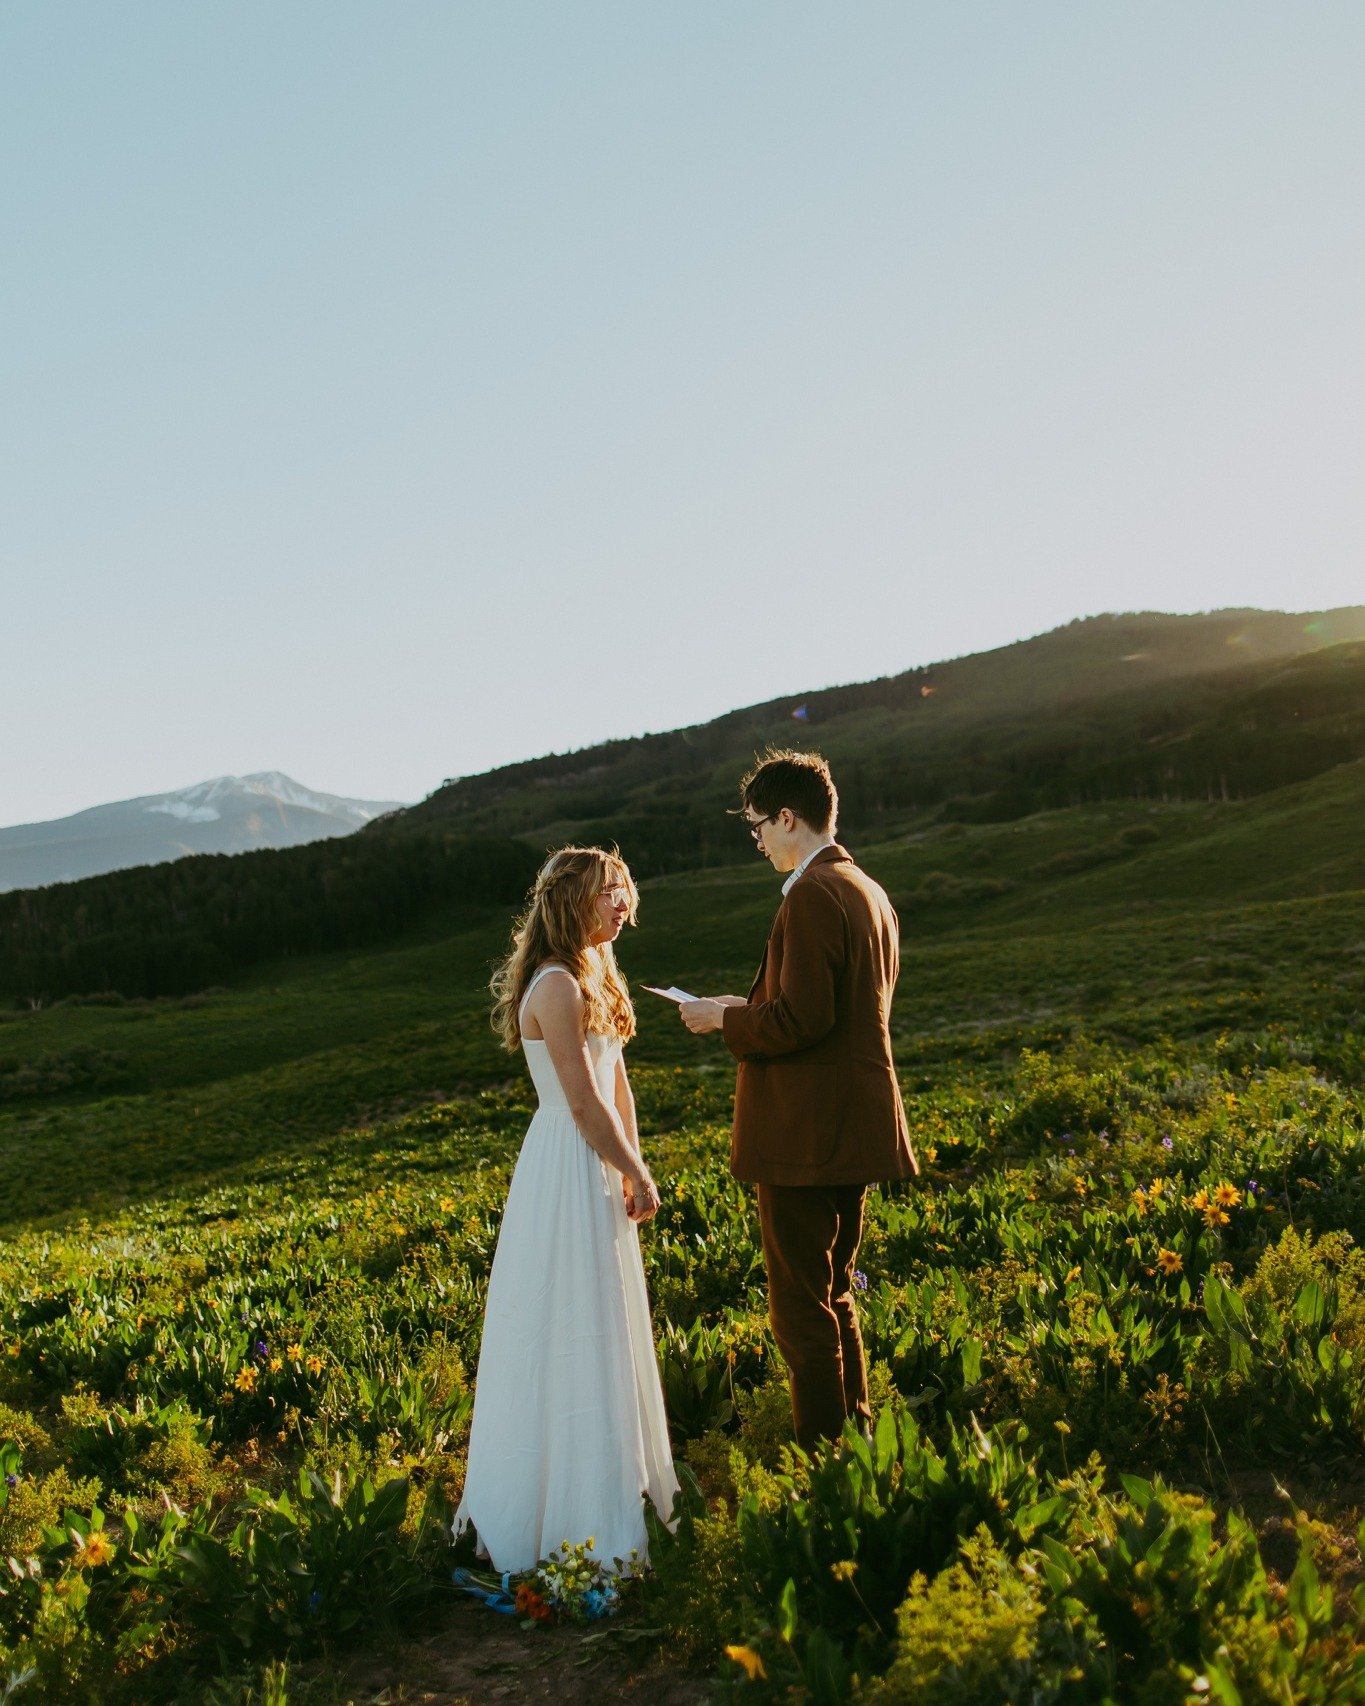 What is the best time of year to elope in Colorado? 🌸🌻🍁❄️

Let's take a look into all the seasons in Colorado, and which would be the best time to elope there!

🌻 Summer 🌻
Summer is by far my favorite time of year in Colorado. The warm air, wild